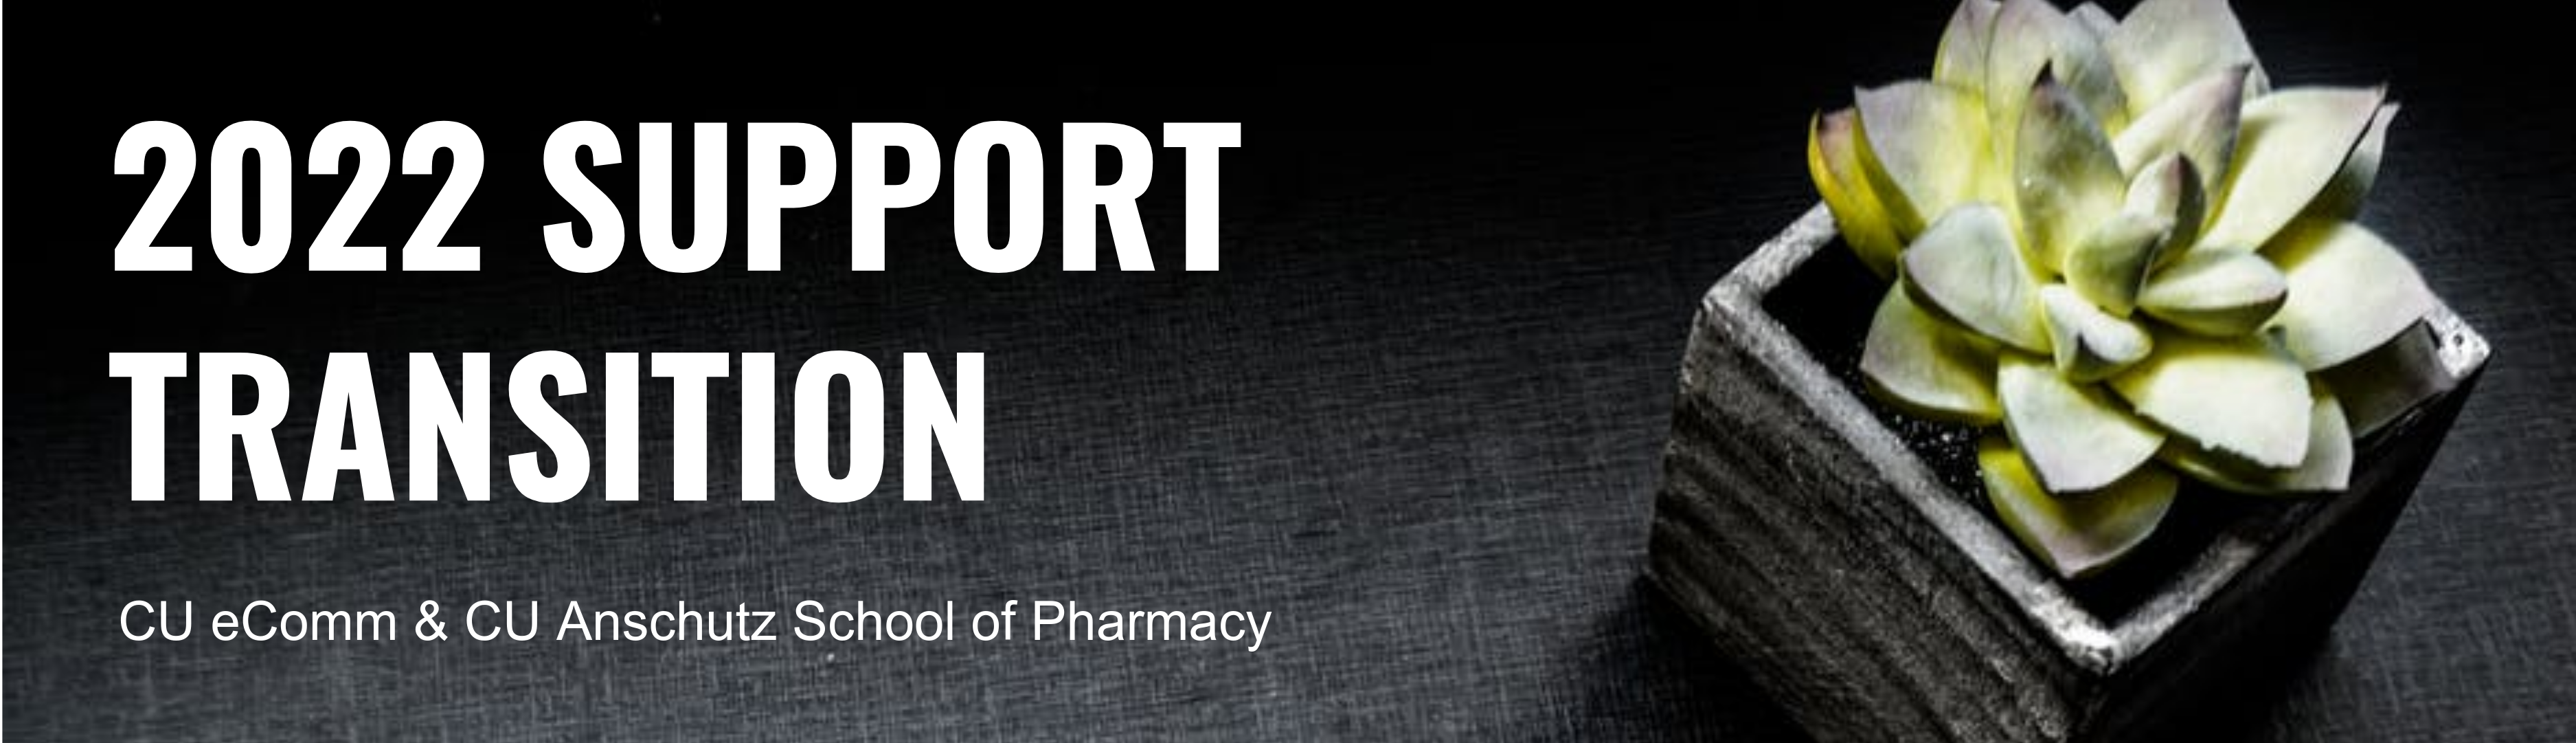 eComm/Pharmacy Support Transition